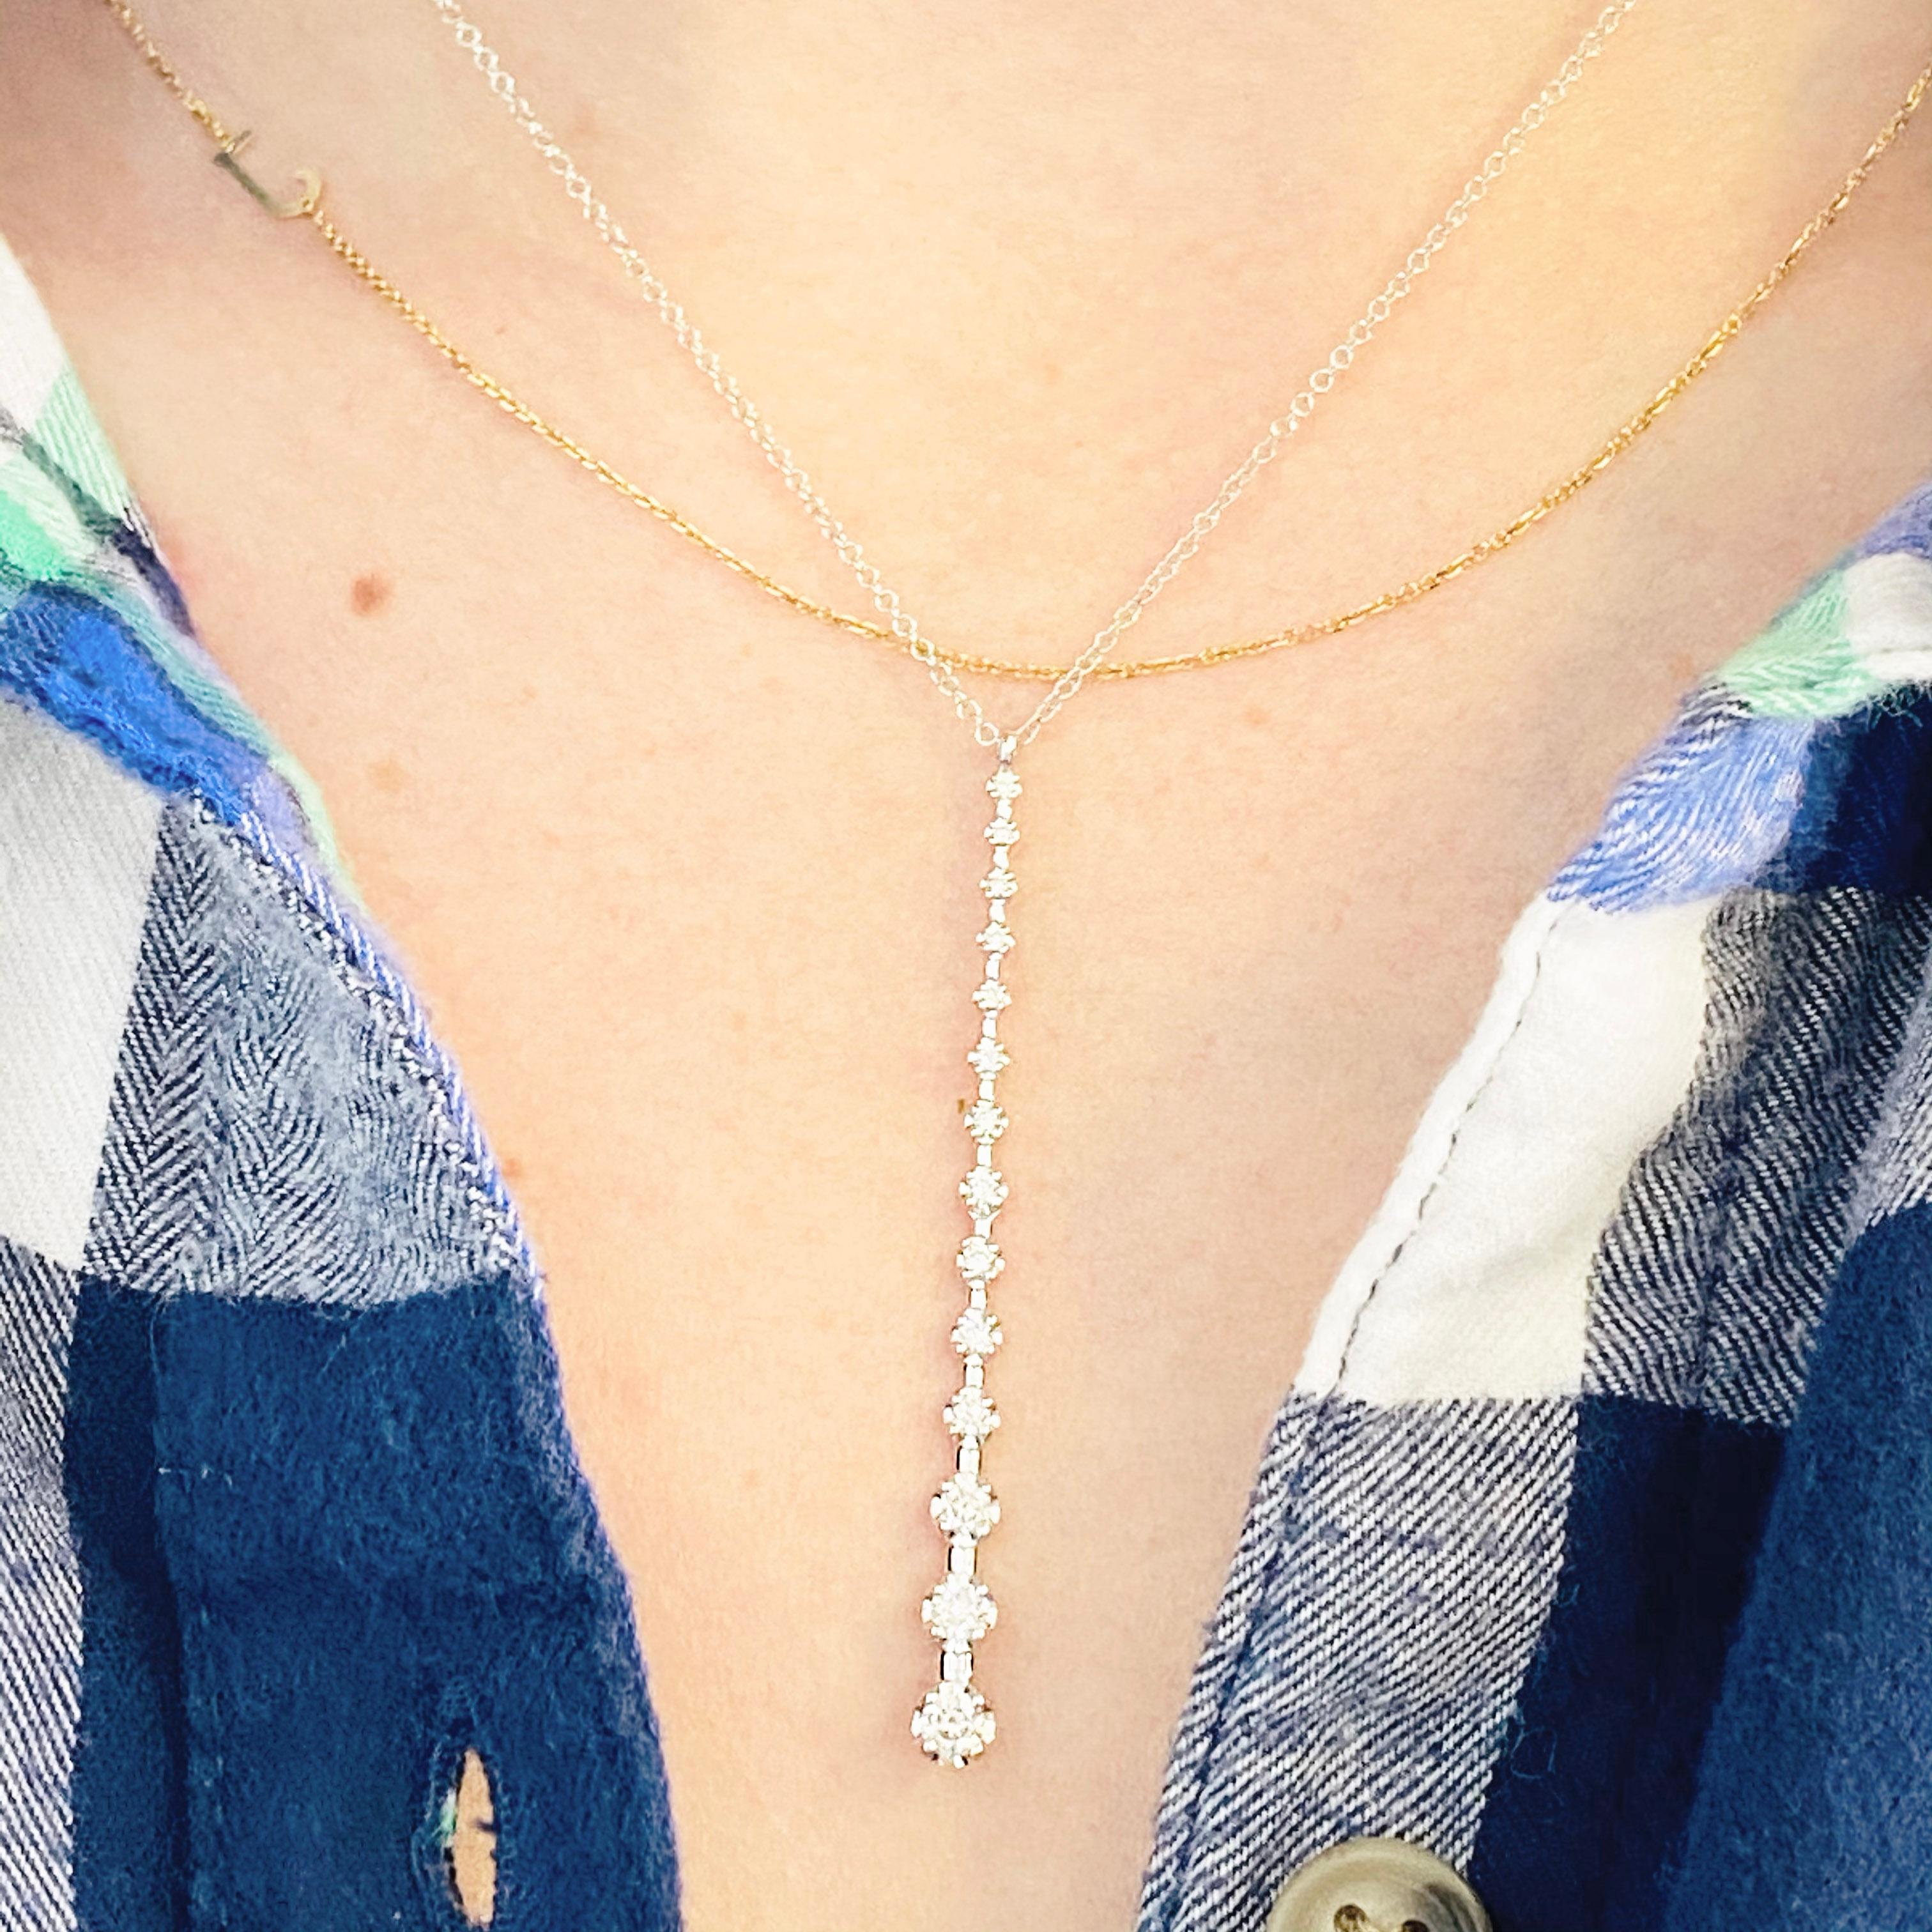 This stunningly sexy beautiful 14k white gold station bar pendant drop dripping with diamonds provides a look that is very modern yet classic! This necklace is very fashionable and can add a touch of style to any outfit, yet it is also classy enough